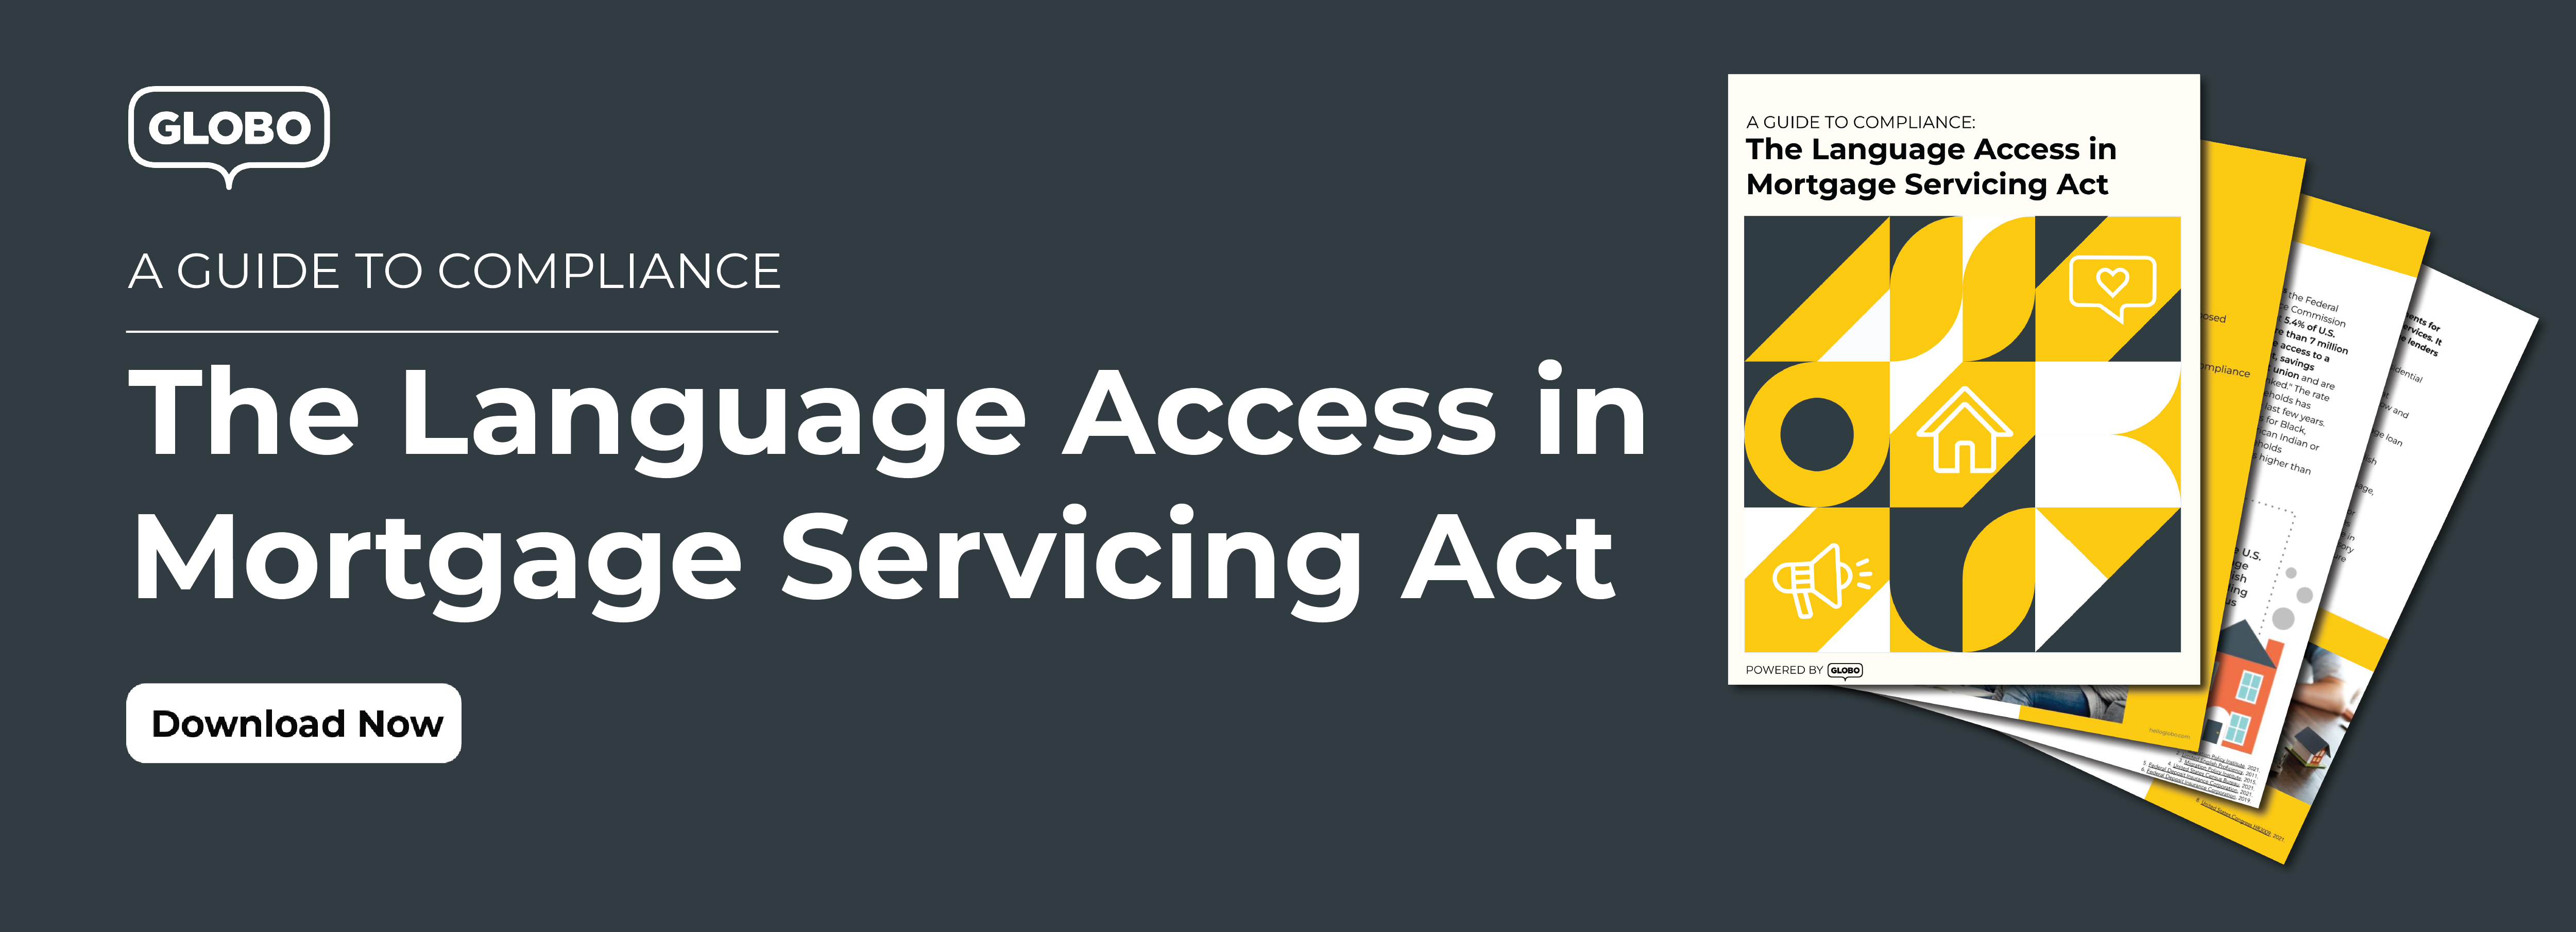 Language Access in Mortgage Servicing Guide